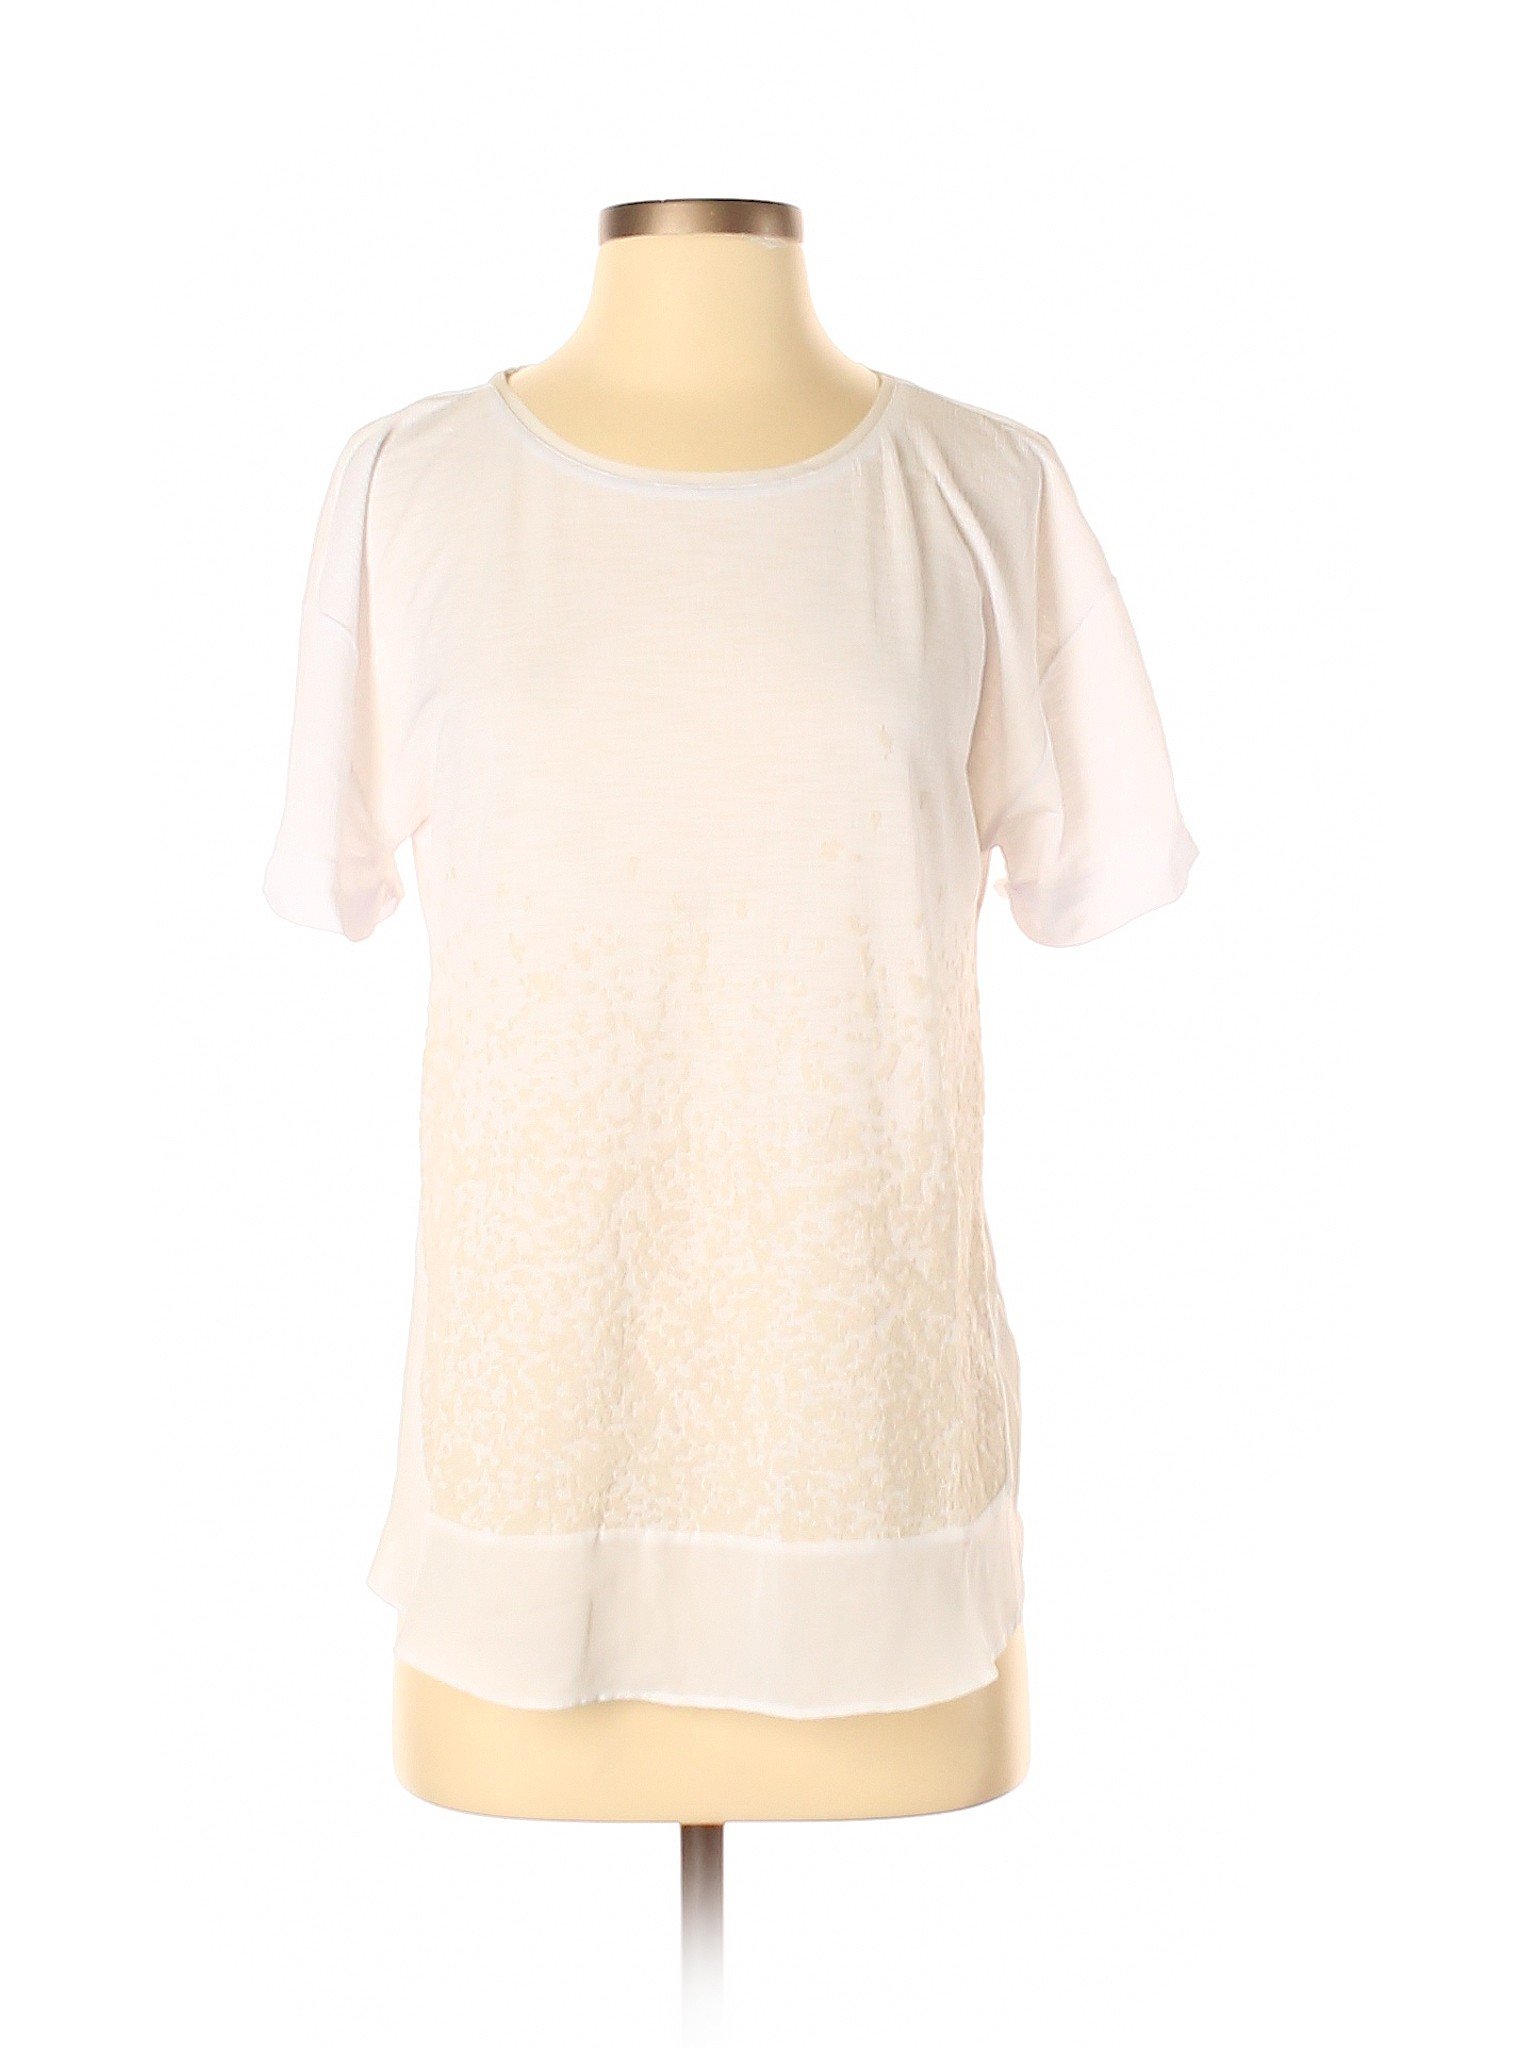 Simply Vera Vera Wang Solid White Short Sleeve Top Size S - 79% off ...